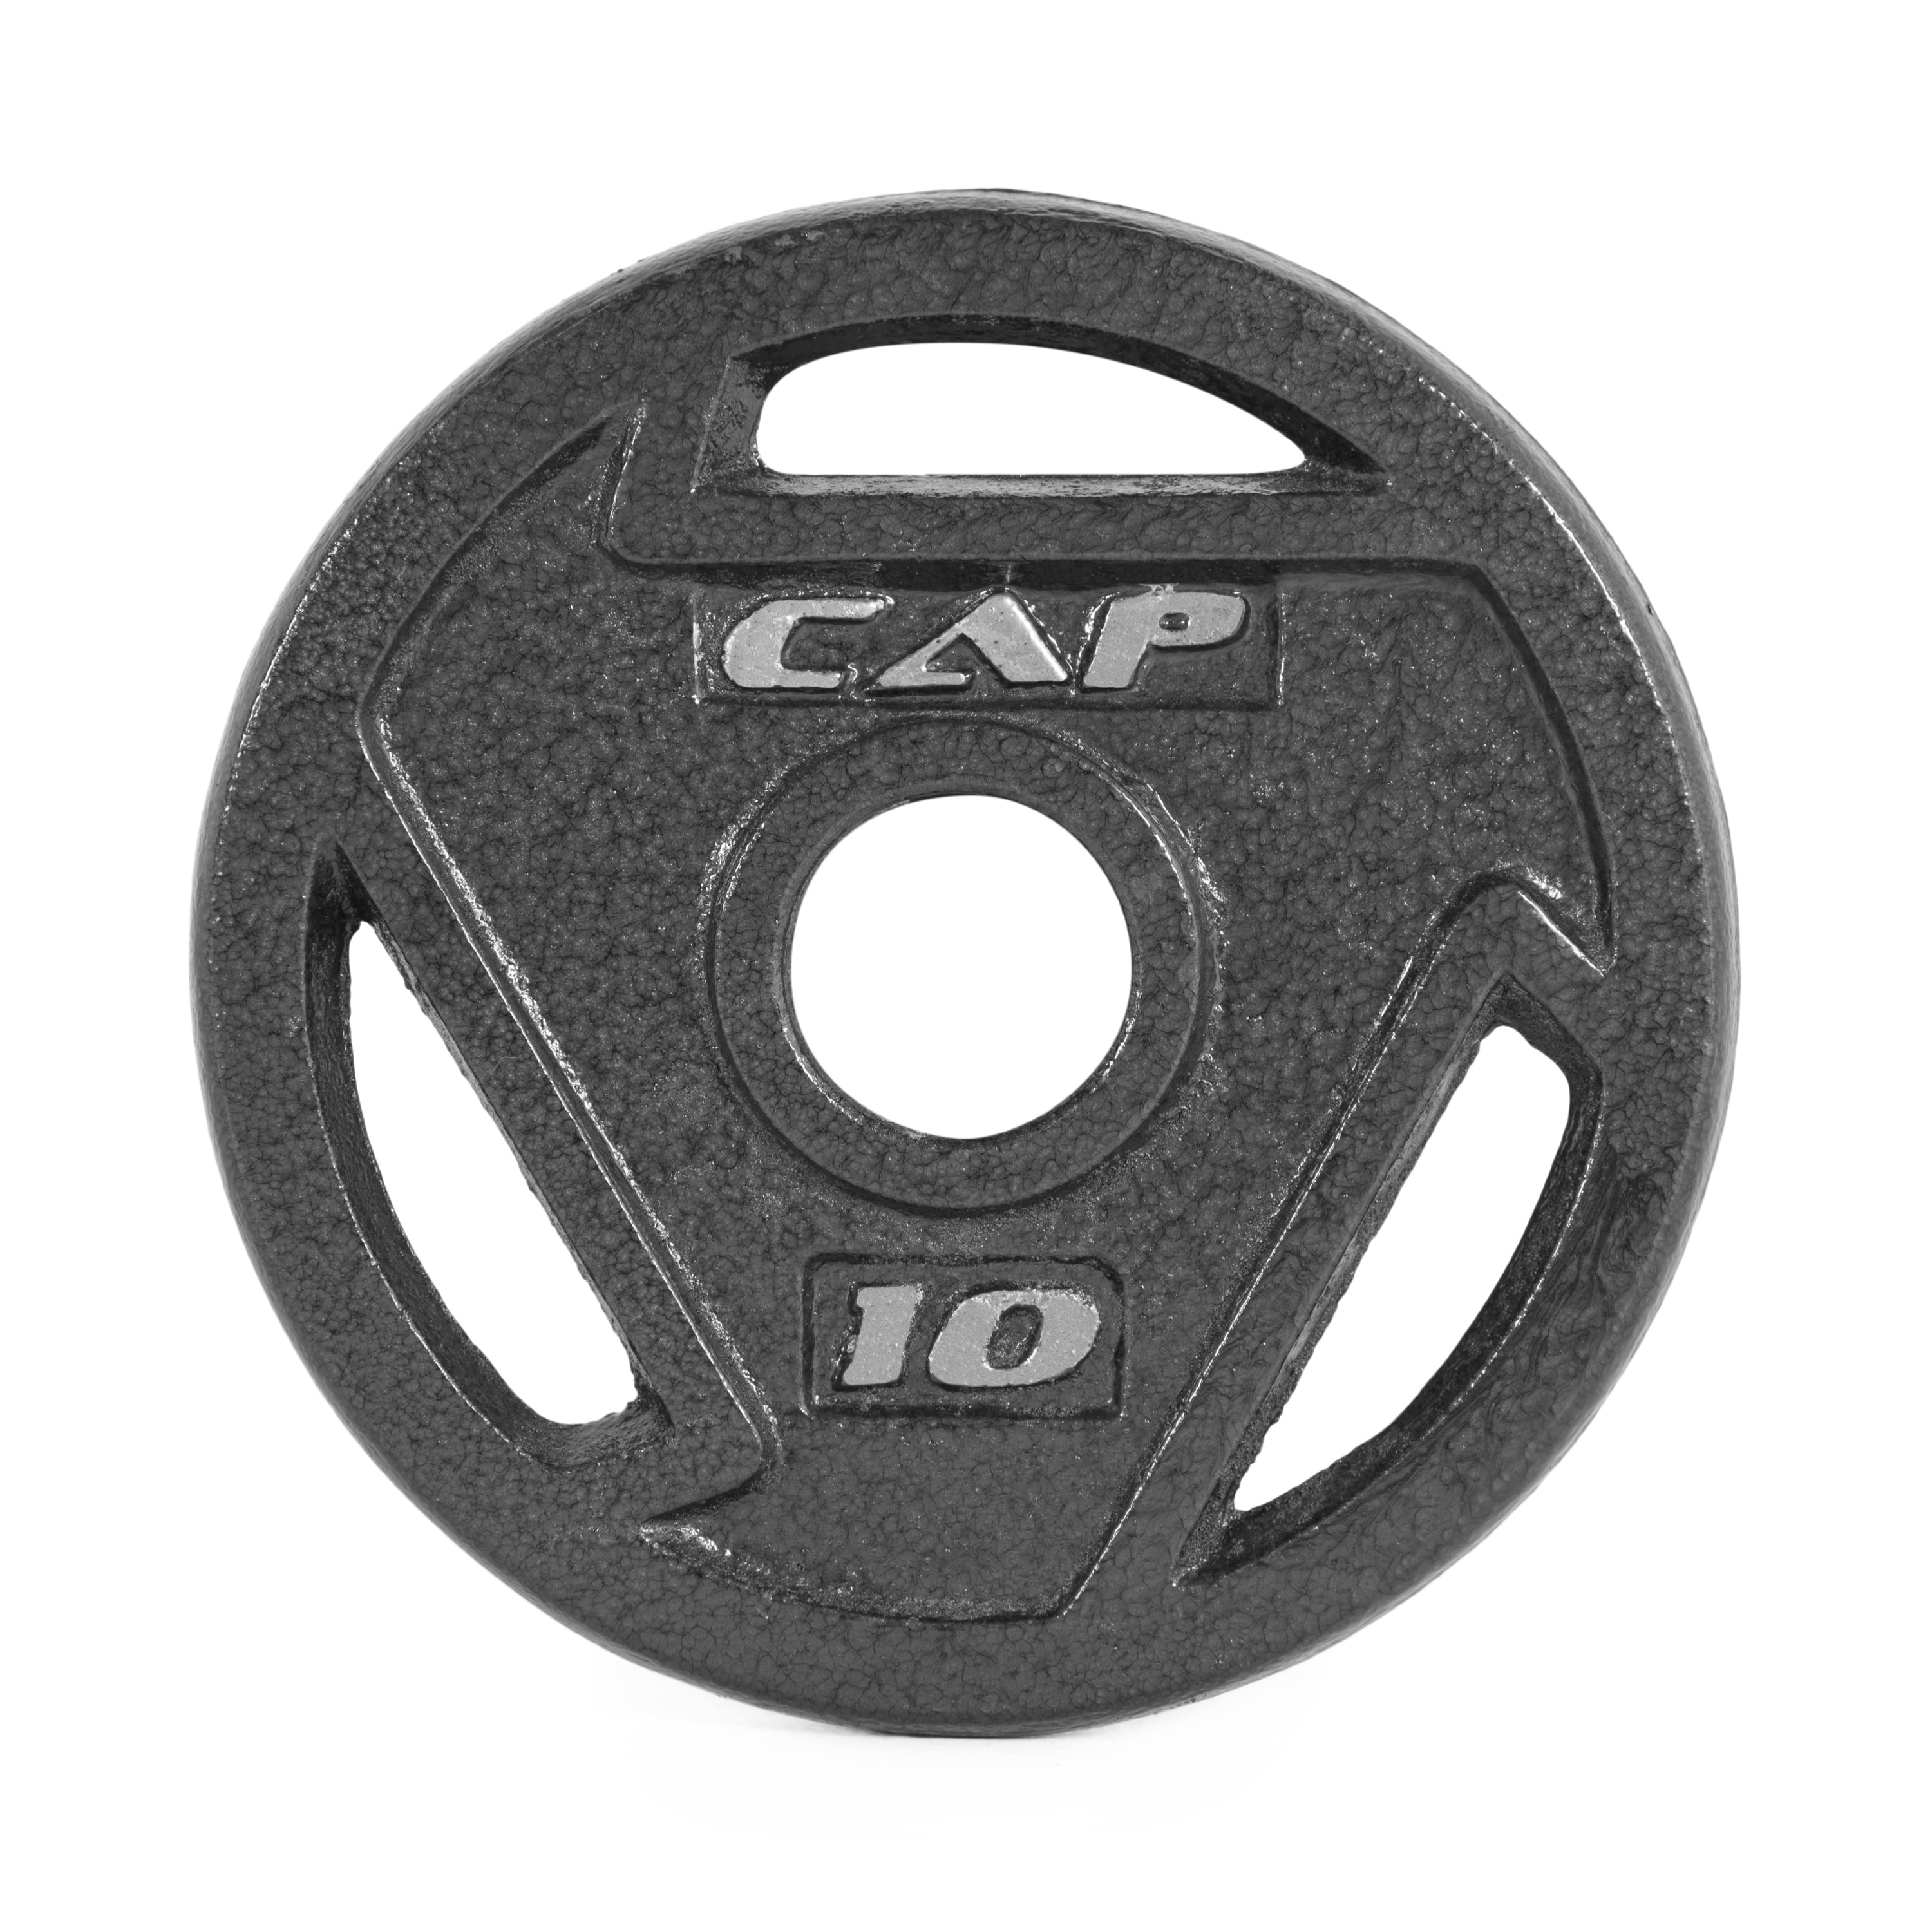 25lb Pairs 5 10 2.5 Details about   BRAND NEW CAP Standard 1" Grip Plates Choose Weight 